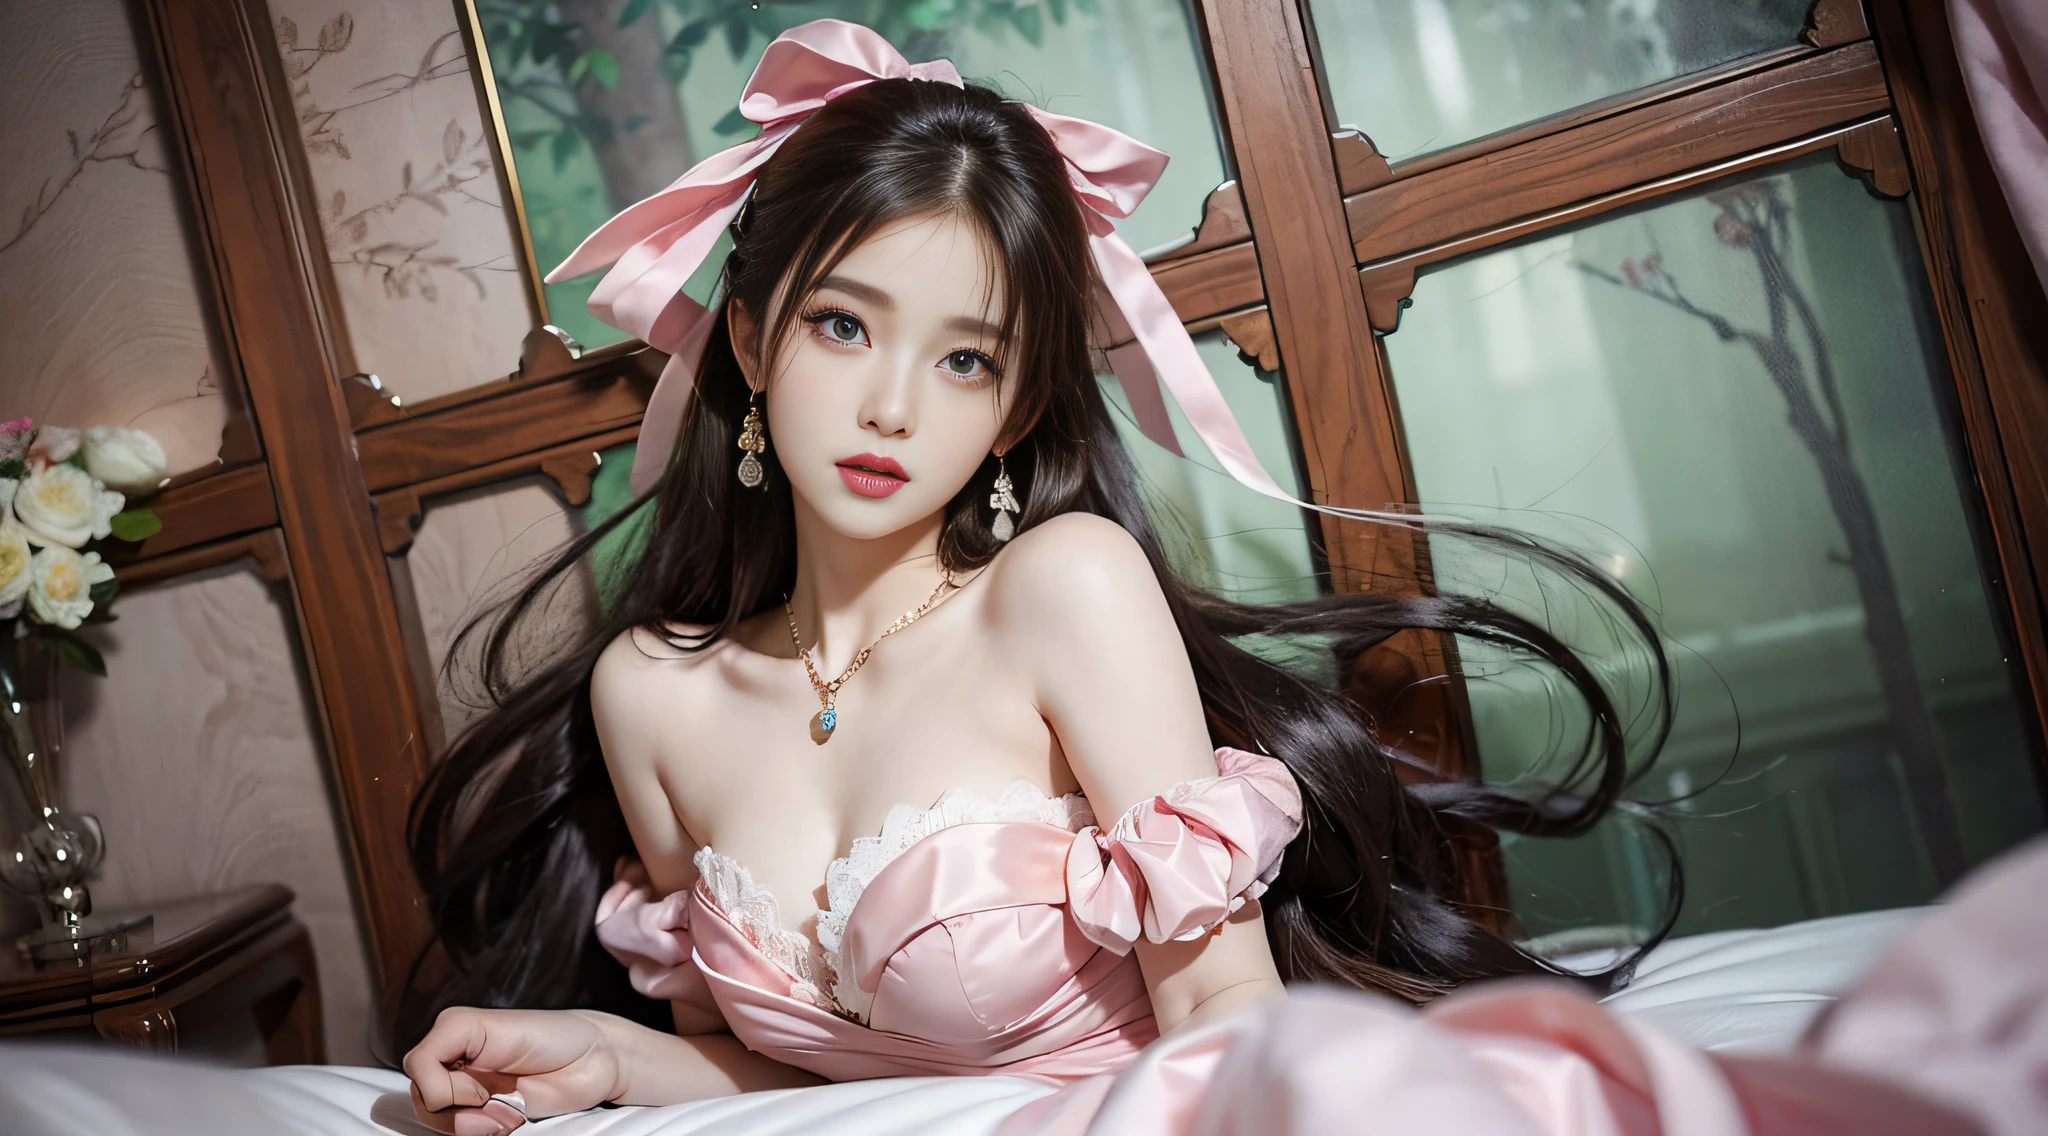 ((Realistic lighting, top quality, 8K, Masterpiece: 1.3)), Clear Focus: 1.2, 1Woman, Perfect Beauty: 1.4, Yushuxin, 1Girl, Dress, Solo, Brunette, Jewelry, Long Hair, Earrings, Bow, Pink Dress, Wood, Nature, Outdoor, Bare Shoulder, Airless Gainsboro, Long Dress, Hair Bow, Forest, Pink Bow,Strapless, Standing, Necklace, Head Tilt, Chapped Lips, Wavy Hair, Strapless Dress,Lace Sleeves, cetin dress,close-up woman in pink dress posing for photo,beautiful virgin,beautiful korean woman, beautiful princess, cute elegant pose, bell delphine, wearing pink dress, beautiful fantasy maiden, anime princess, beautiful seductive anime woman,beautiful asian girl, attractive anime girl, elegant glamorous cosplay,(lying on bed:1.8),(beautiful orb-articulated doll:1.3),luxurious princess dress